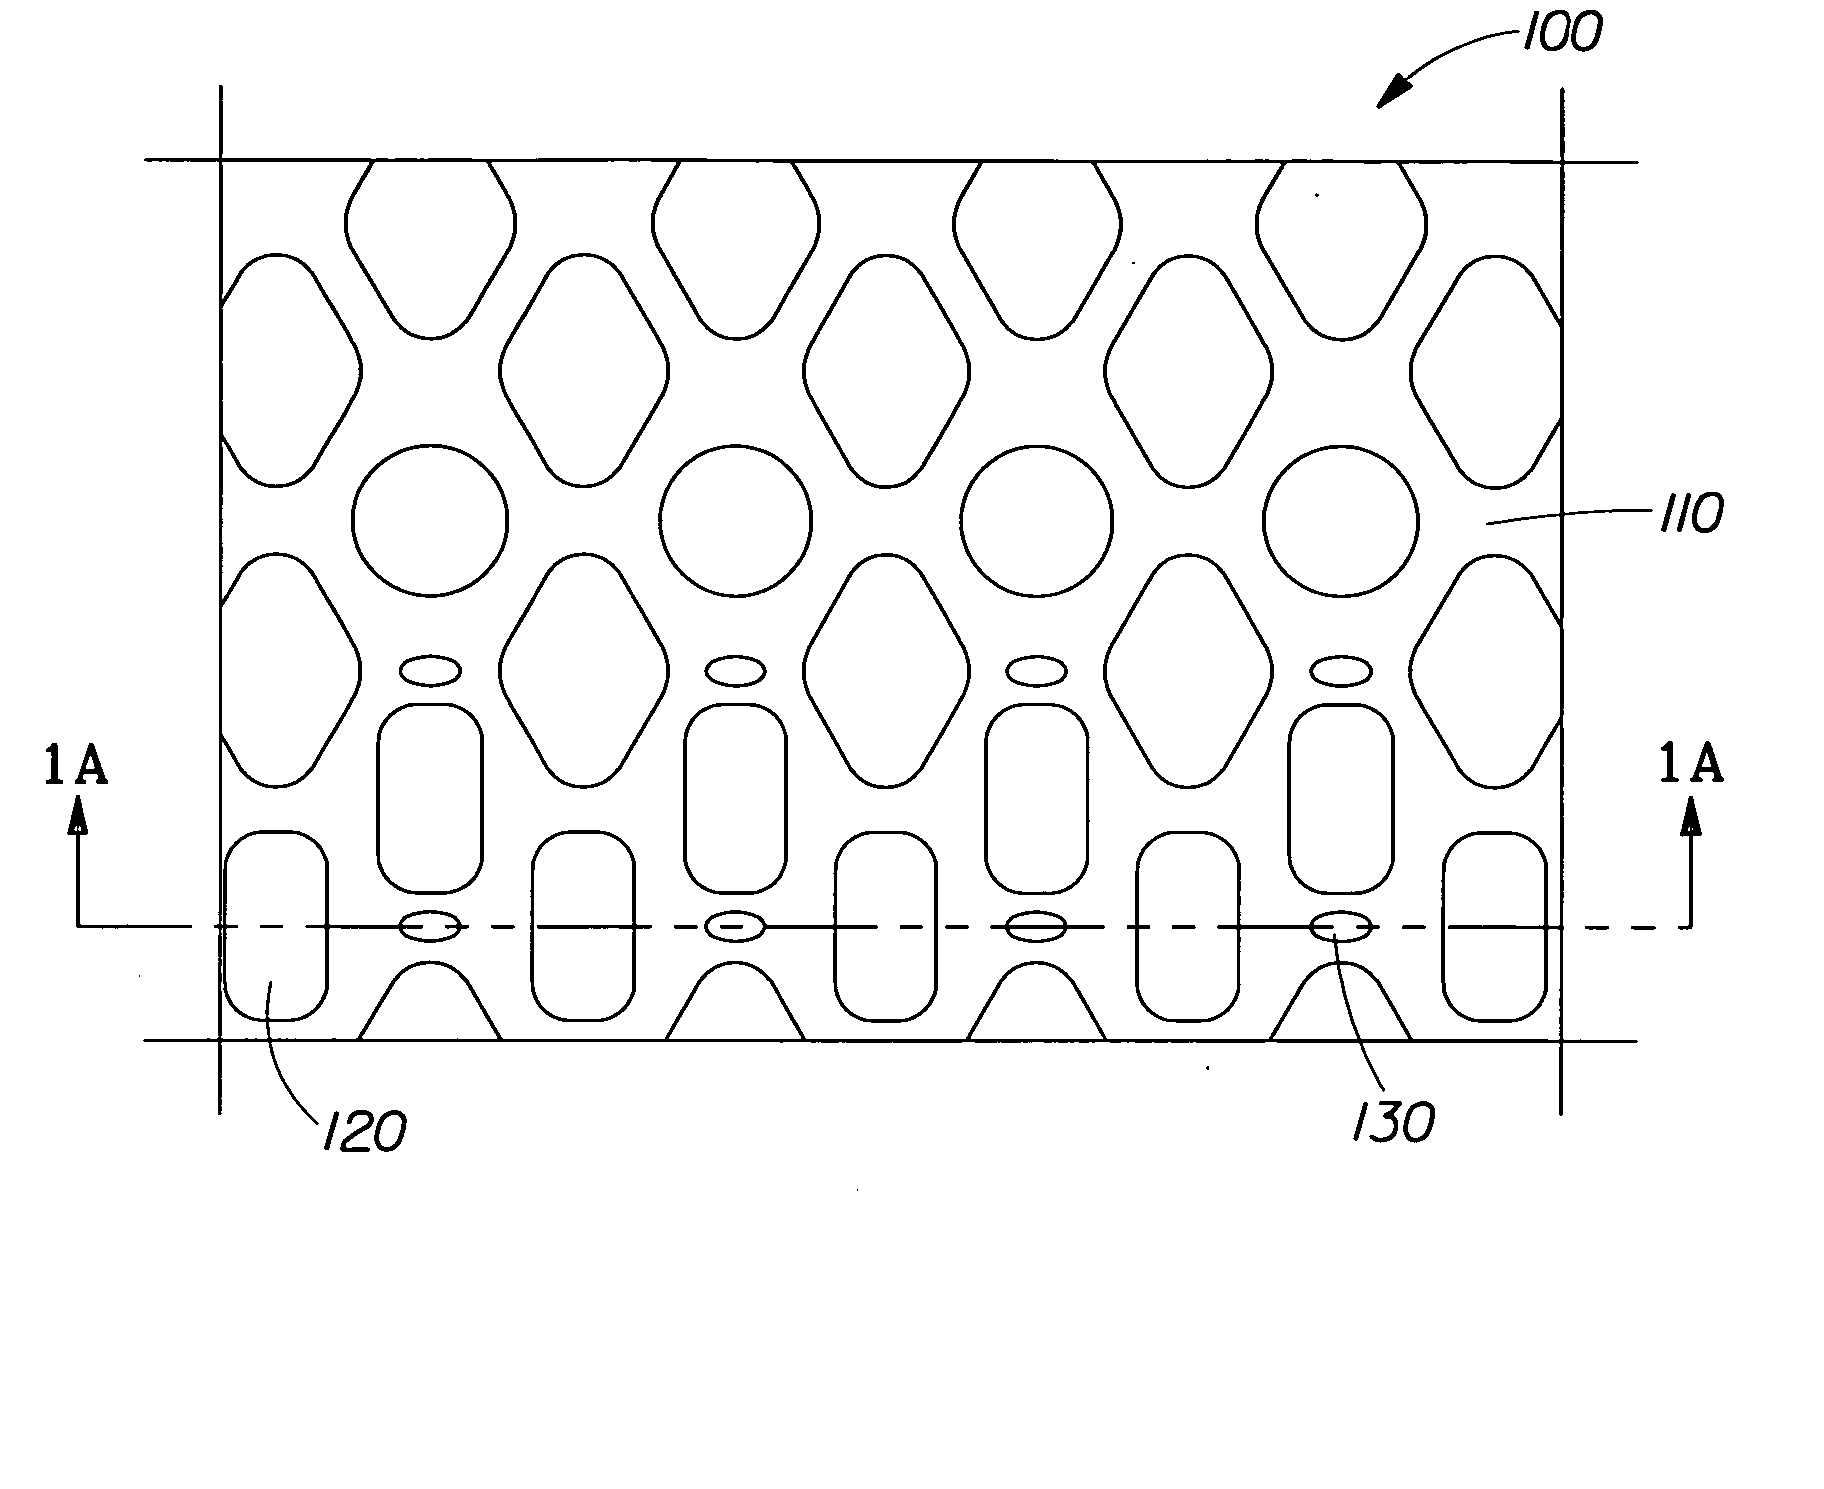 Process for making a flexible structure comprising starch filaments